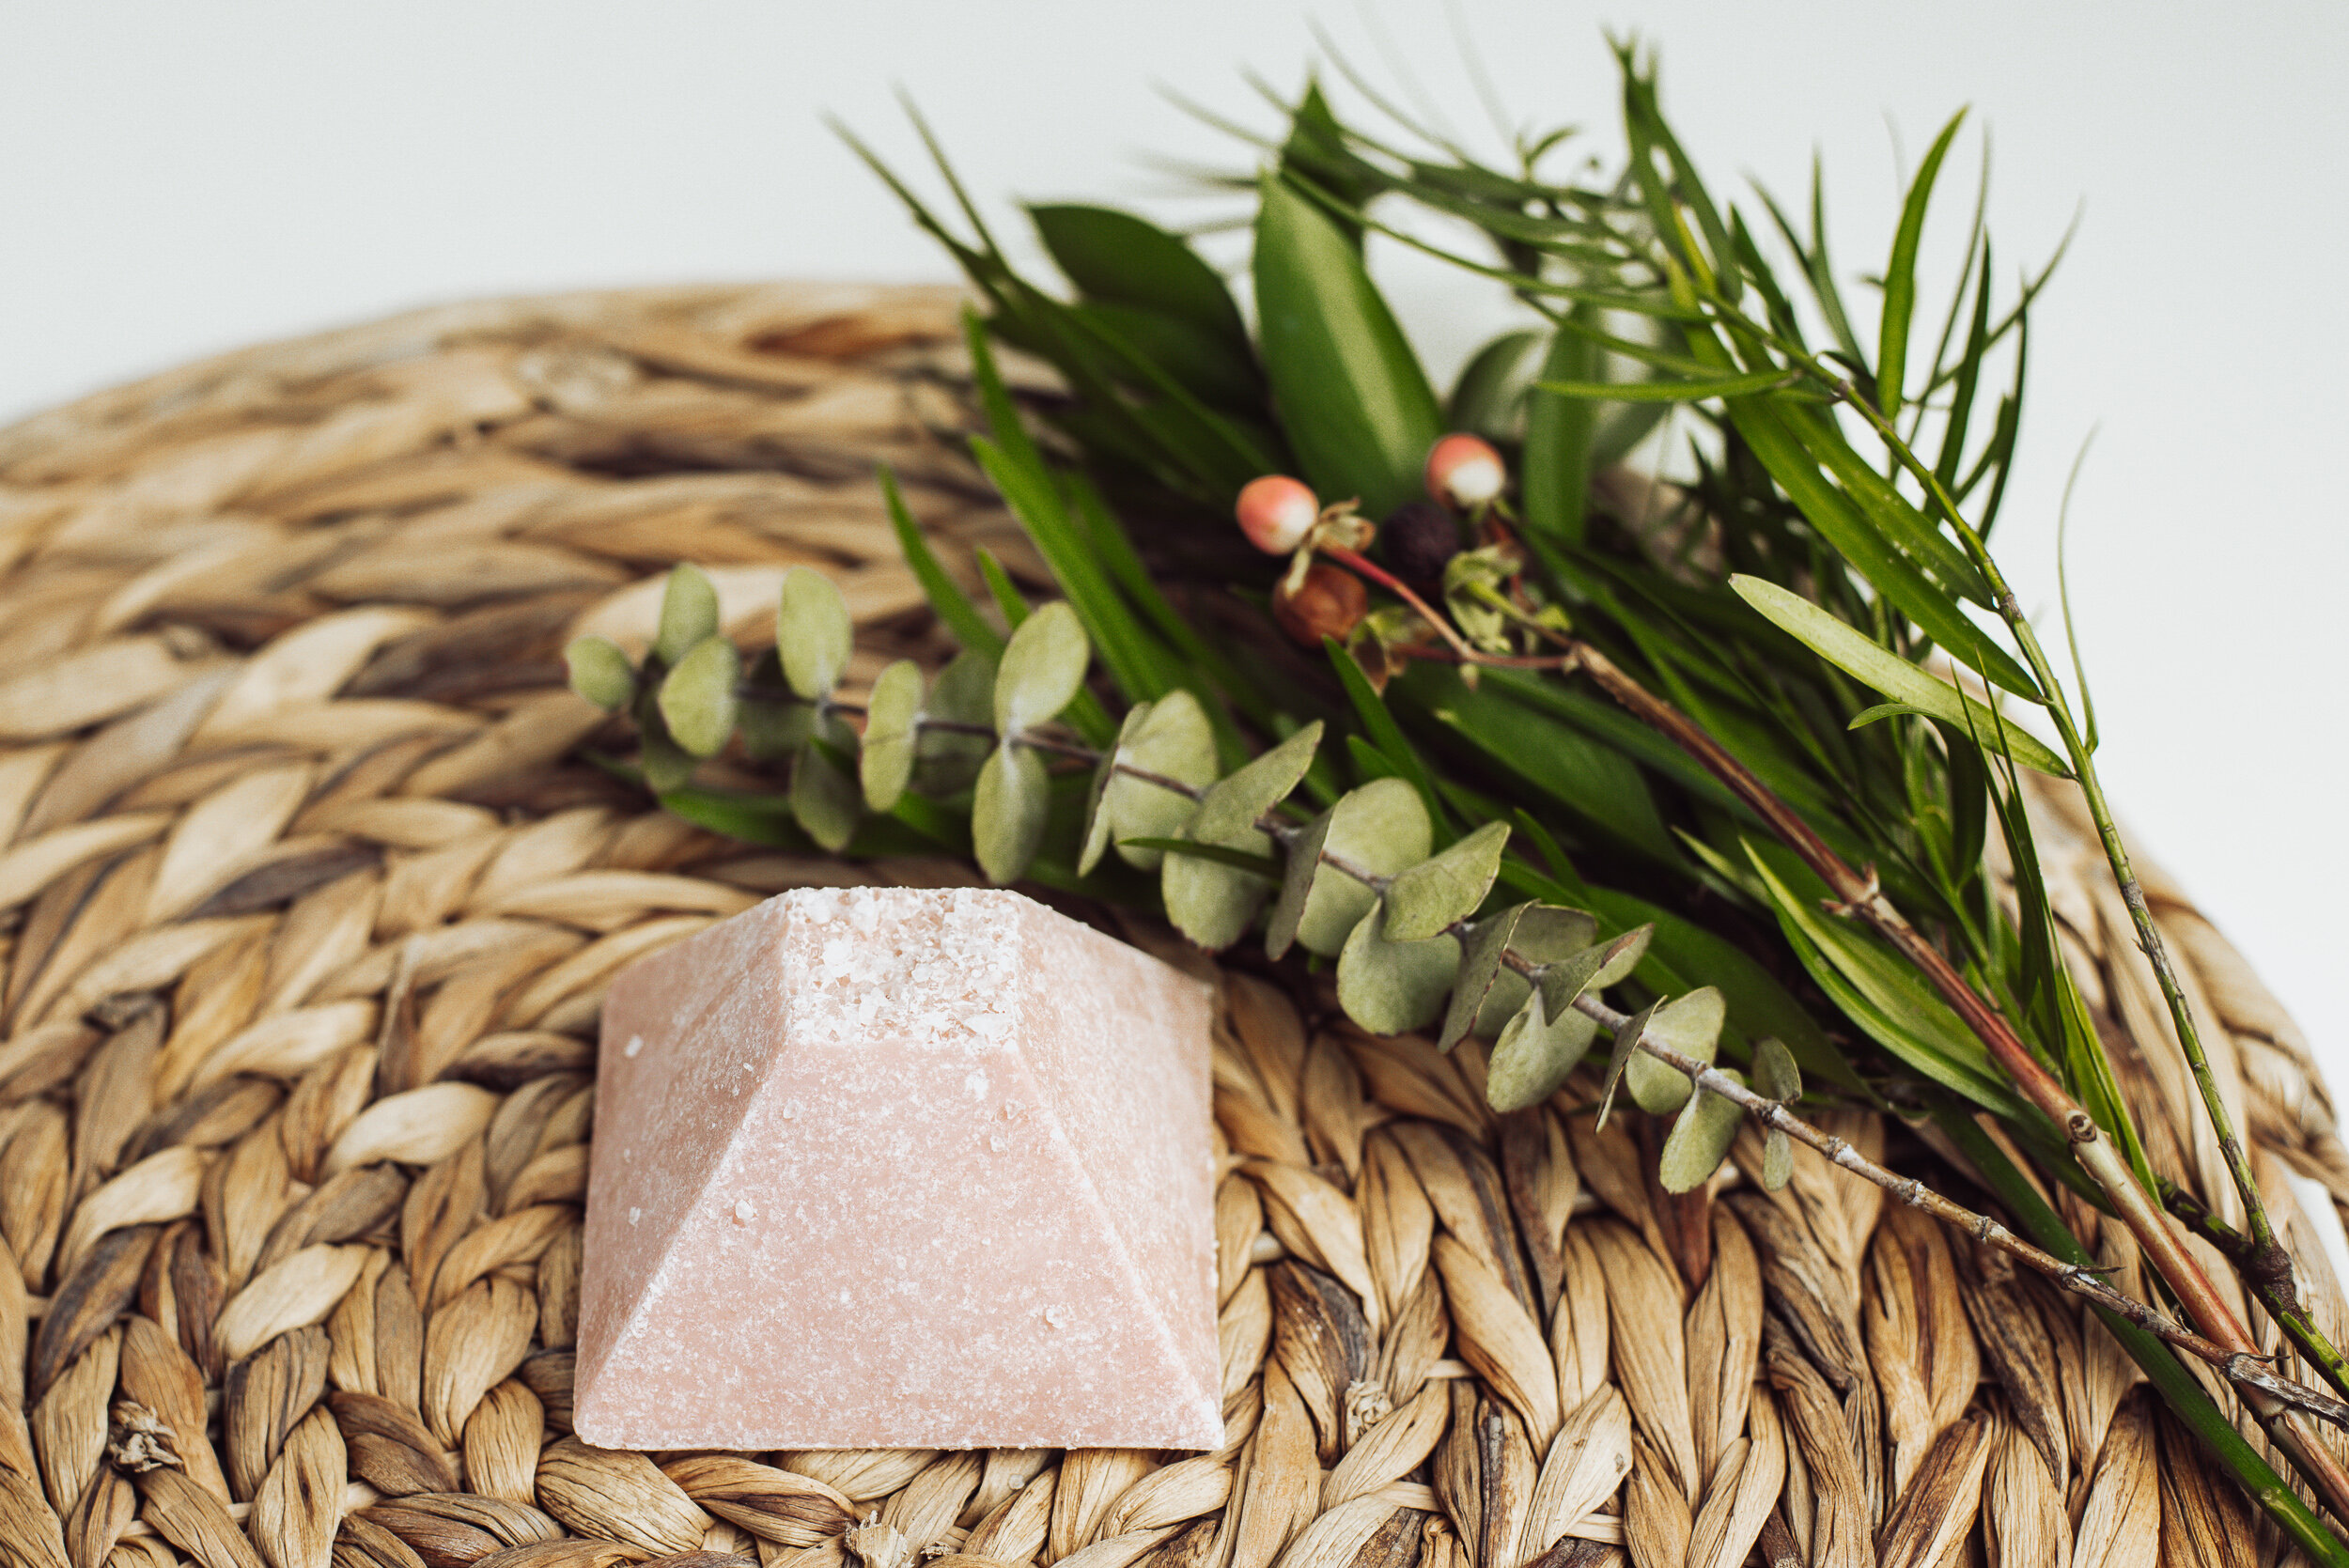 rose pink handmade soap next to a small bouquet of fresh greens on top of a rattan plate placemat